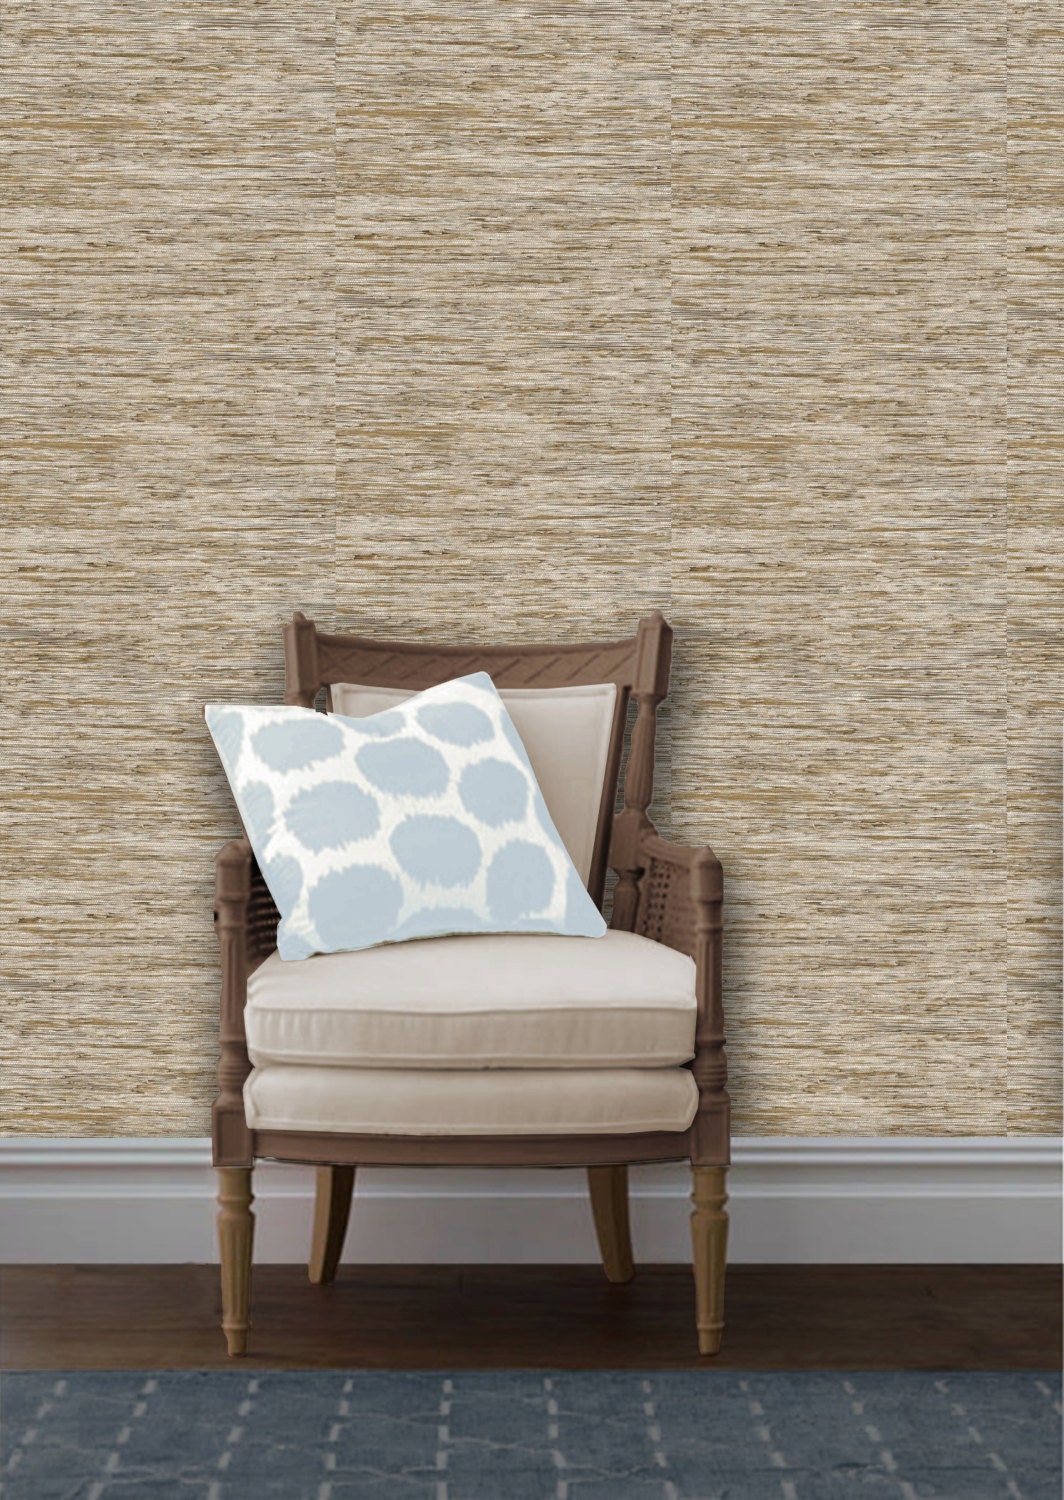 Tempaper 56sq ft Sand Vinyl Textured Grasscloth SelfAdhesive Peel and Stick  Wallpaper at Lowescom